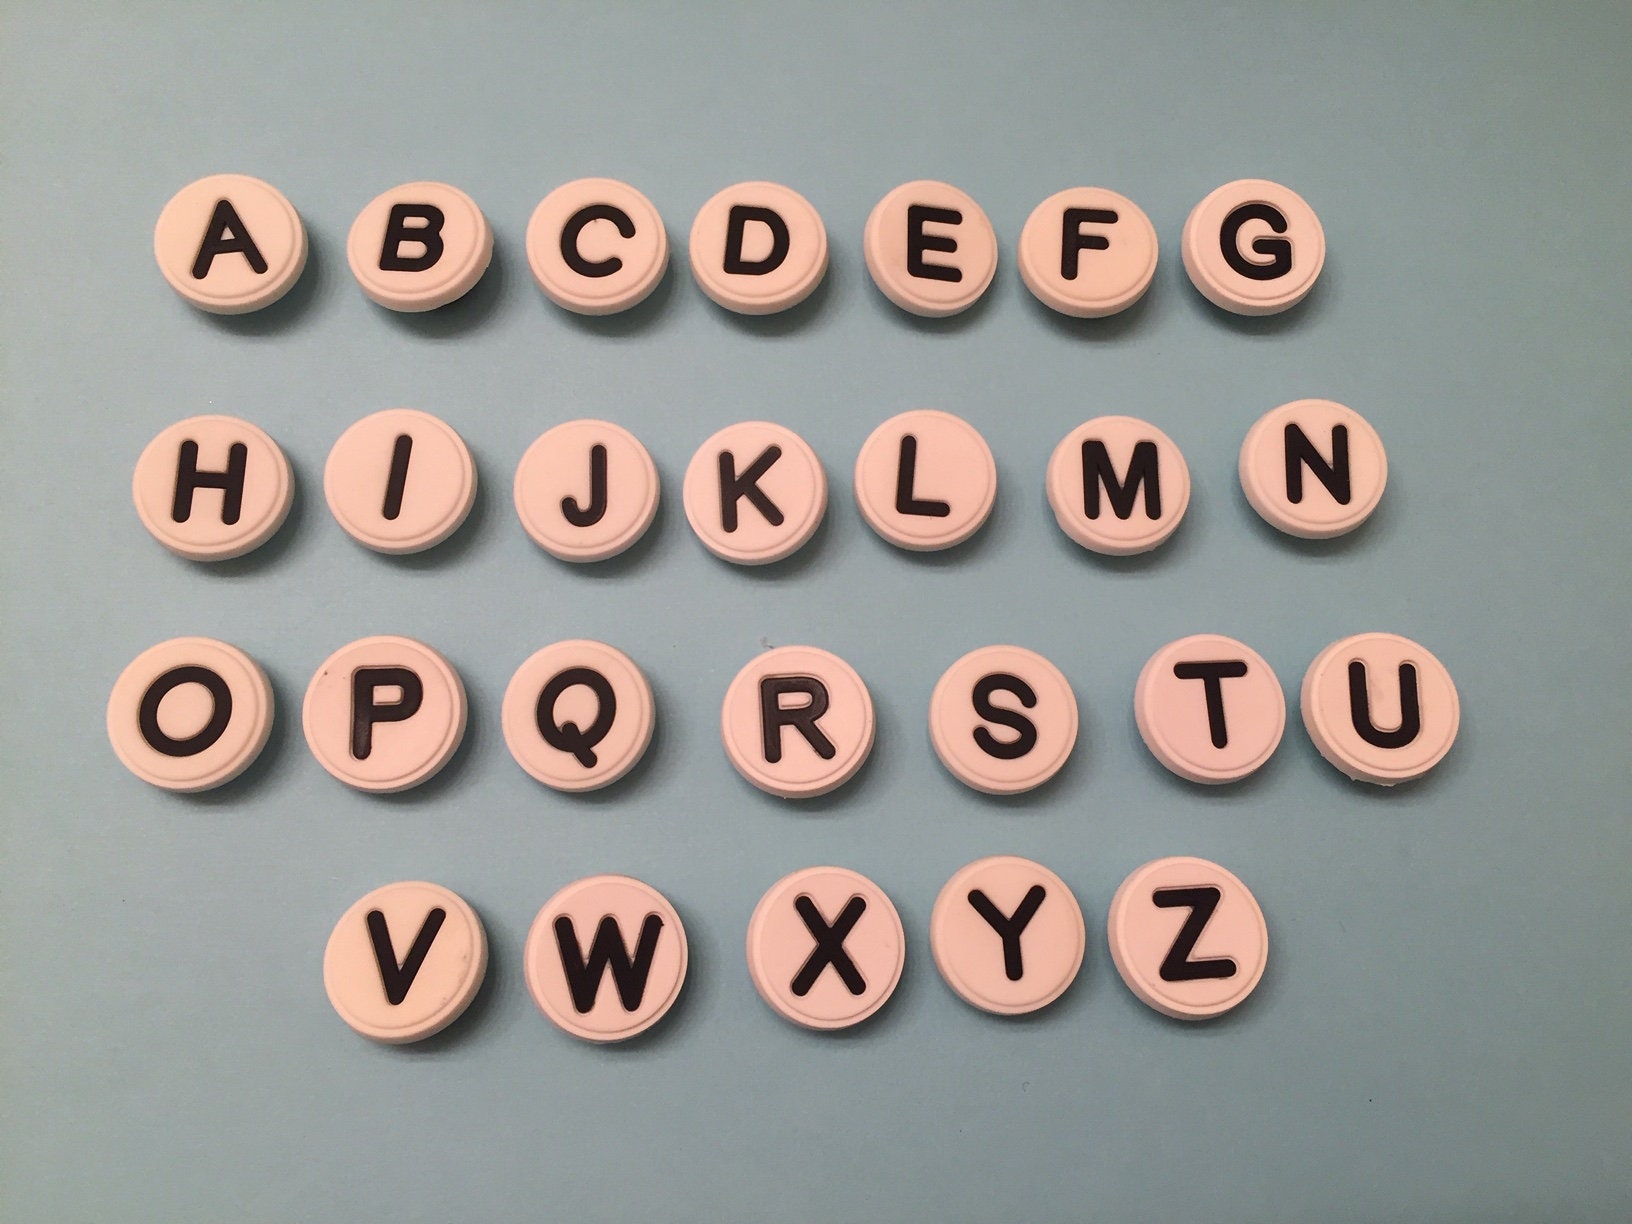 Colorful Letters / Numbers PVC Shoe Charms for Your Crocs / Silicone  Bracelet / Party Favors / Gifts for Kids 